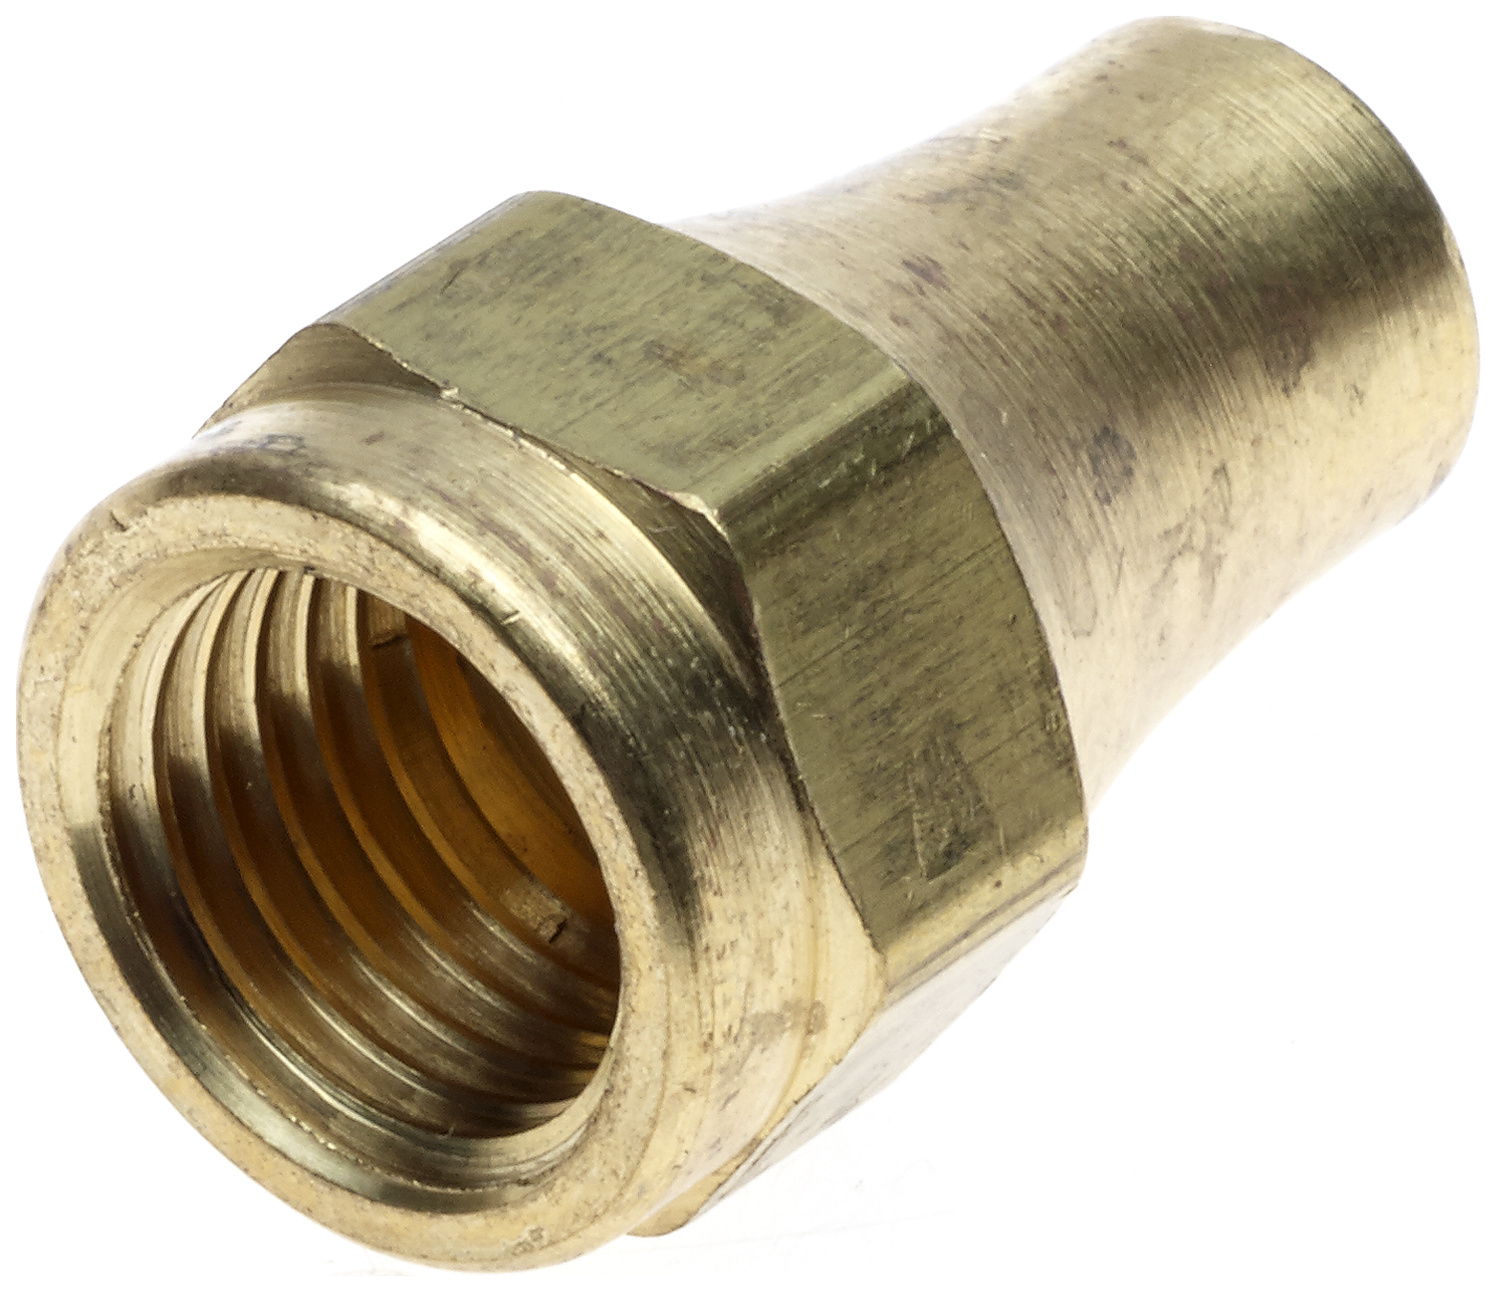 HYDRO MASTER 3/4 Inch Brass Garden Hose Adapter Double Female Quick Connector Solid Brass 2 Pack 